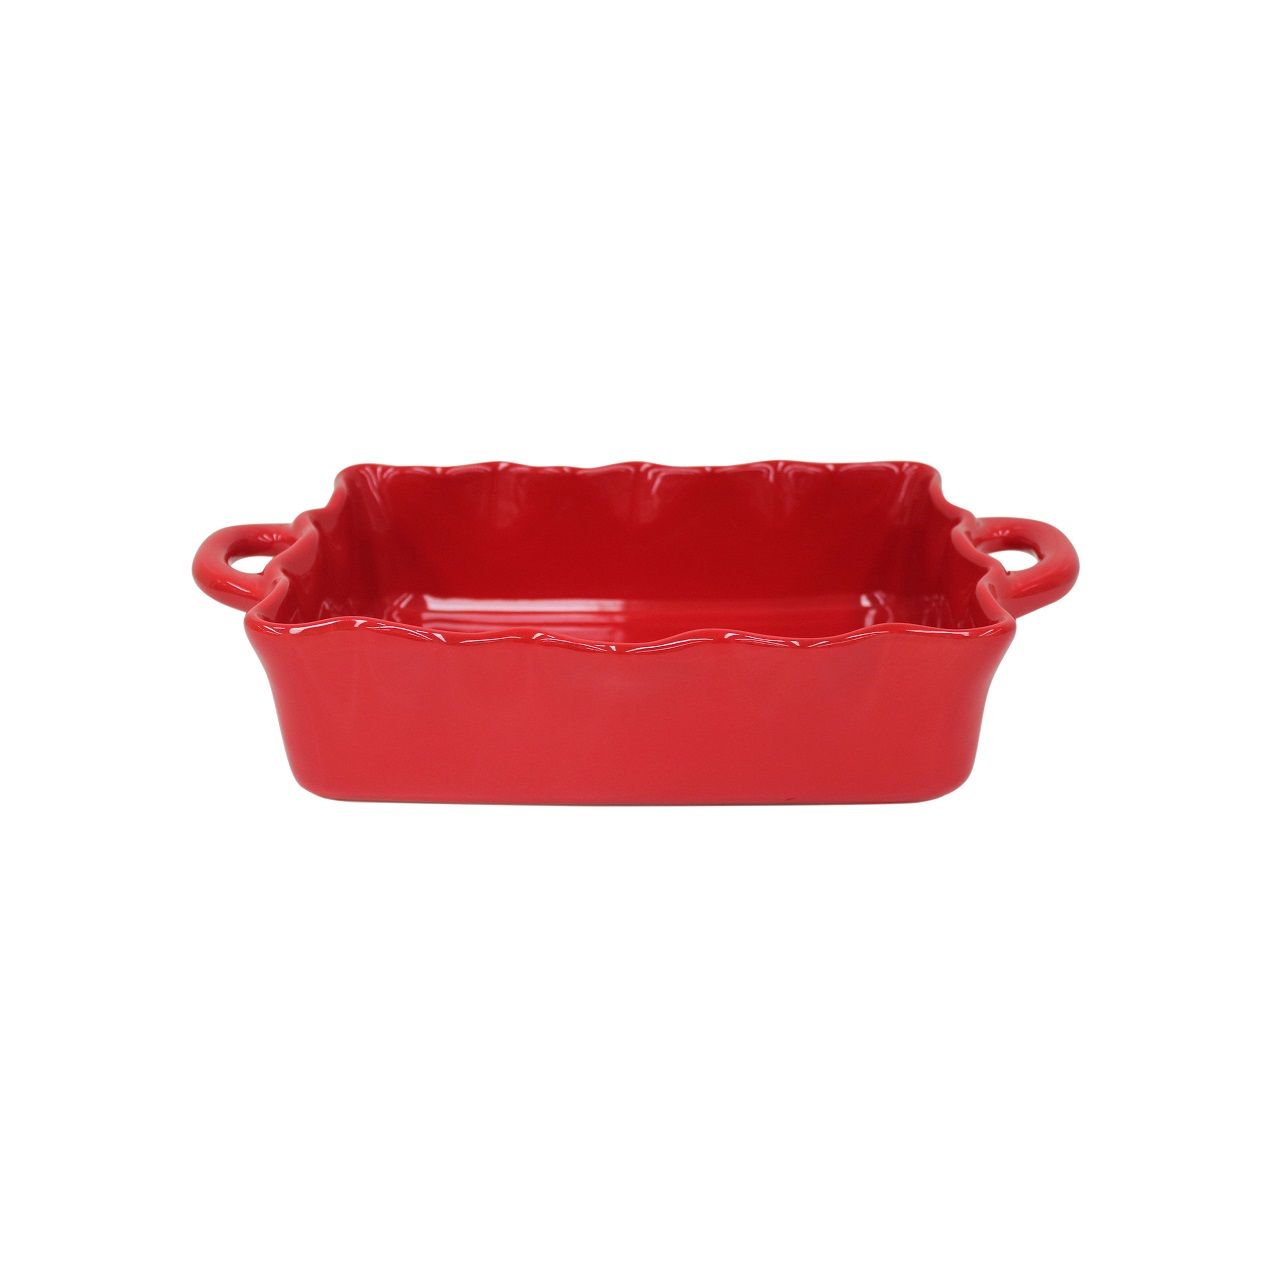 Cook & Host Red Rect Baker (with Handle) 34cm Gift